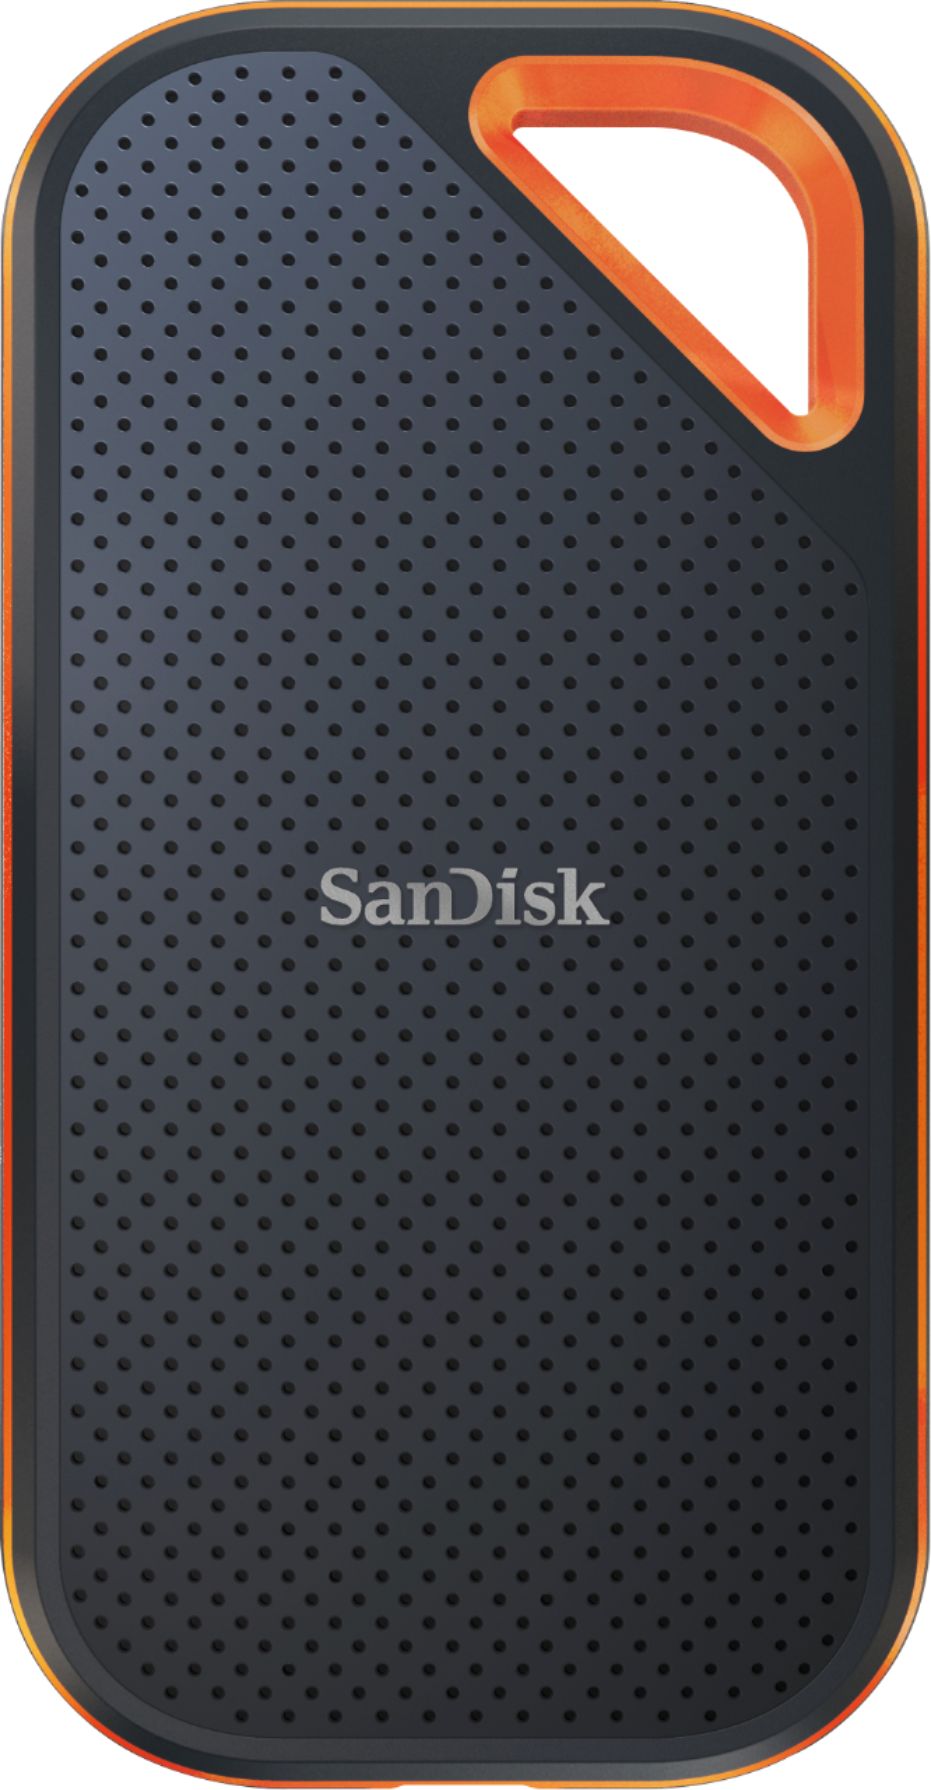 SanDisk - Extreme Pro 500GB External USB 3.1 Gen 2 Portable Solid State Drive - Black/Red